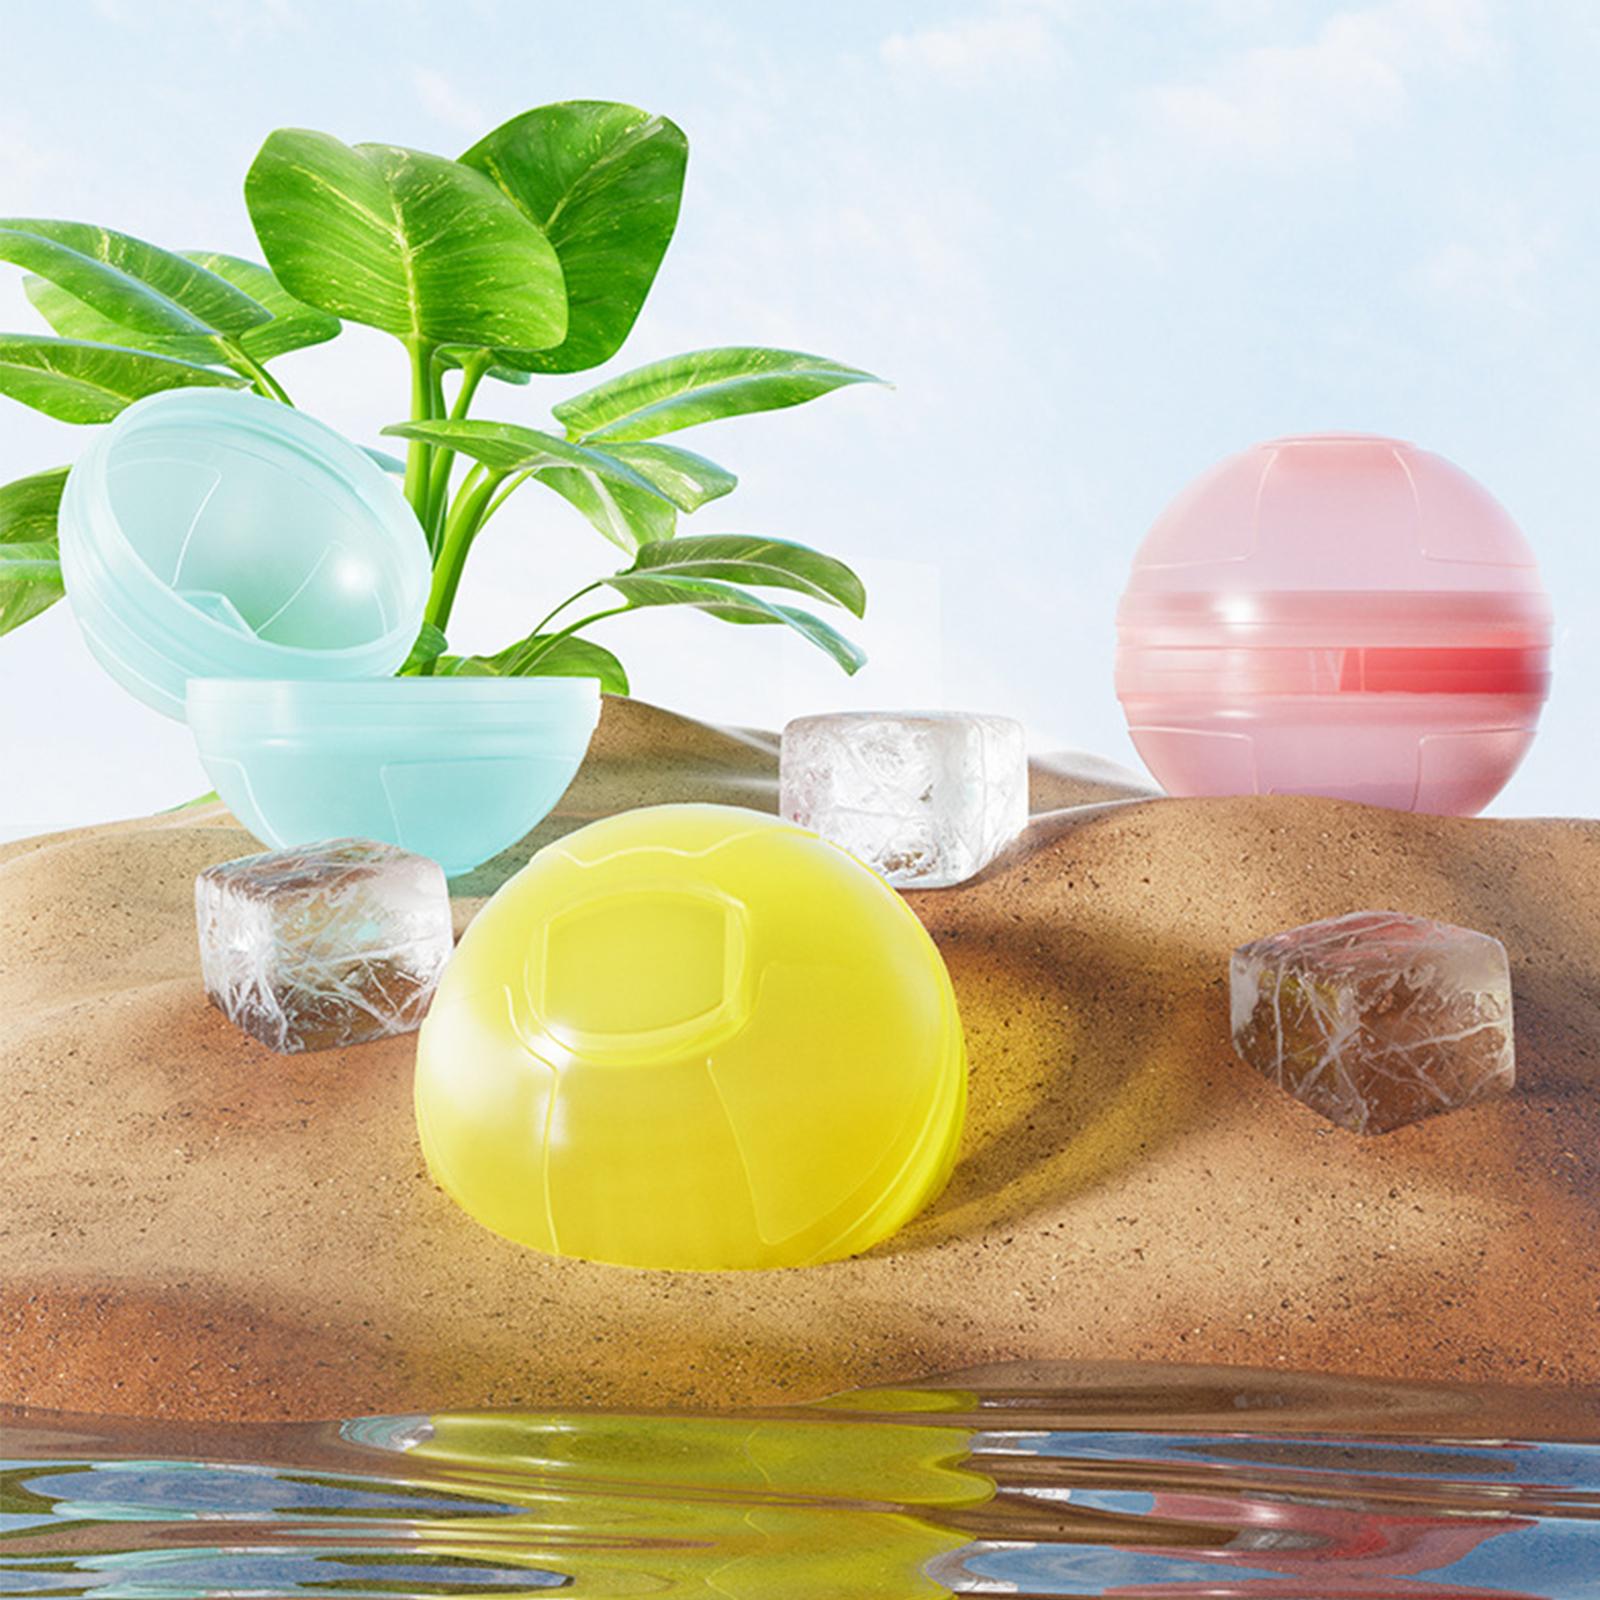 Reusable Water Balloons Refillable Water Outdoor Water Toys for Families Fun Regular White